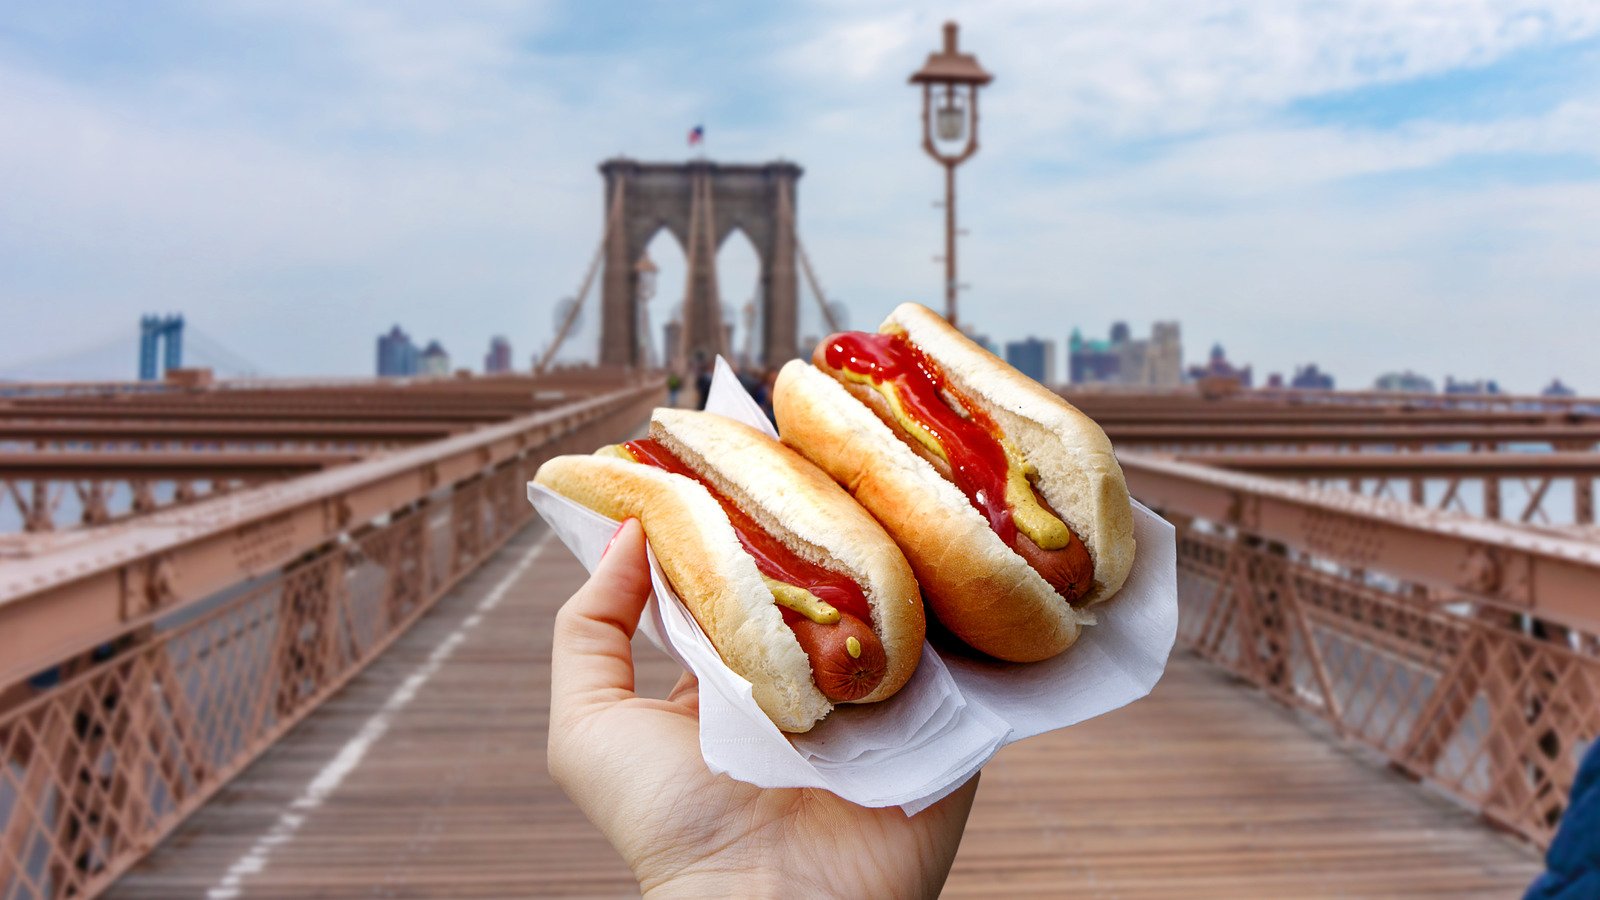 What Makes New York City-Style Hot Dogs Unique?